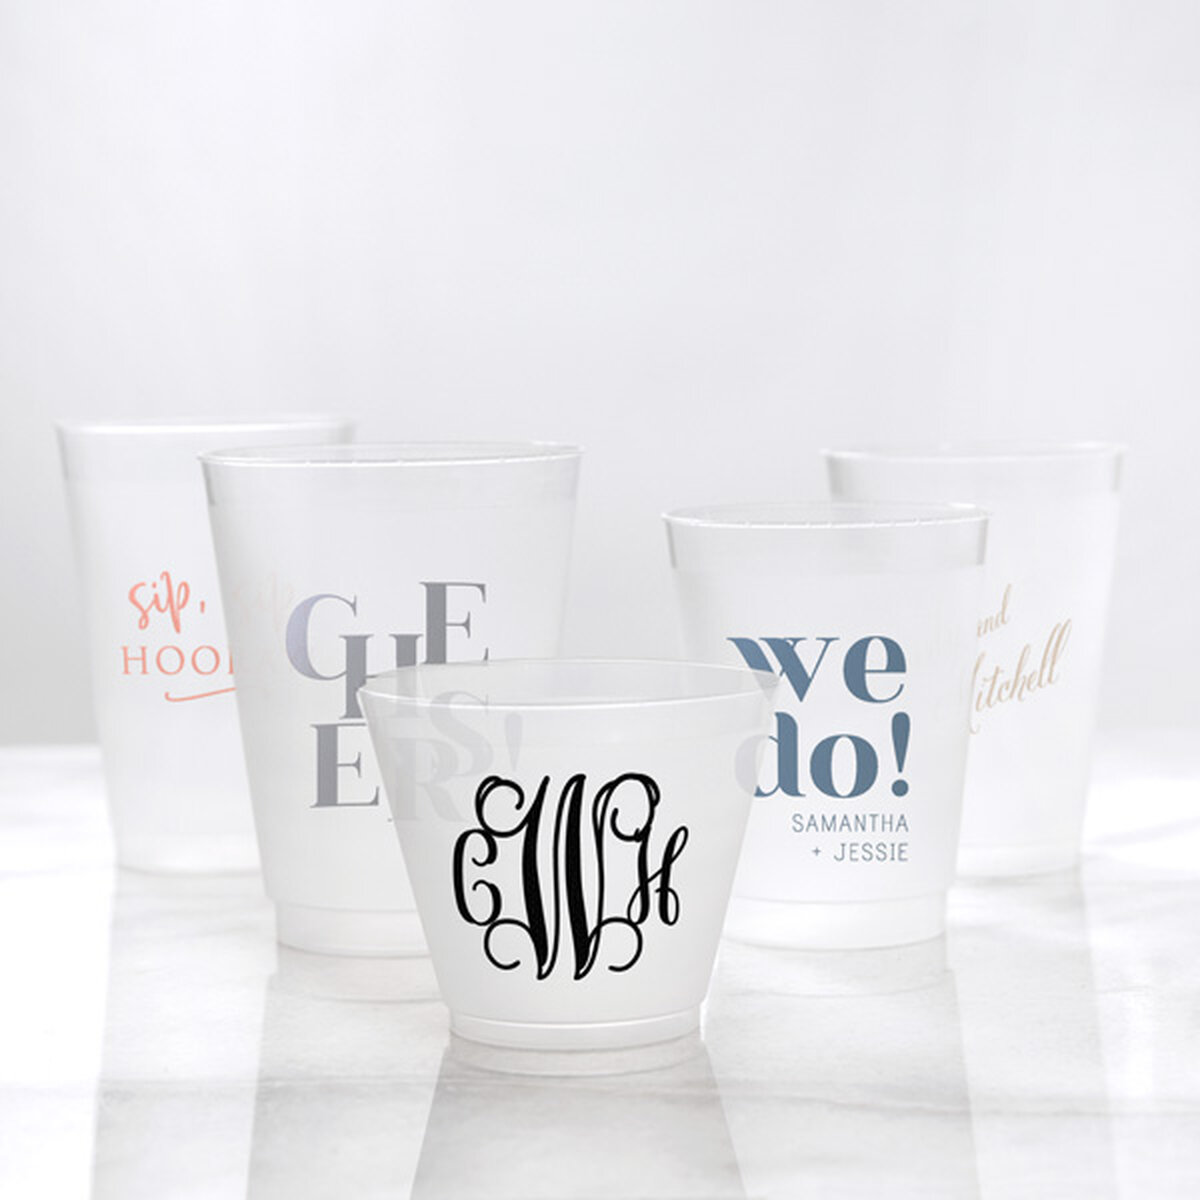 Plastic Cups Custom Wedding Cups Custom Wedding Cups Rehearsal Dinner Cups Custom Cups Stadium Cups 12oz Personalized Cups Party Cups